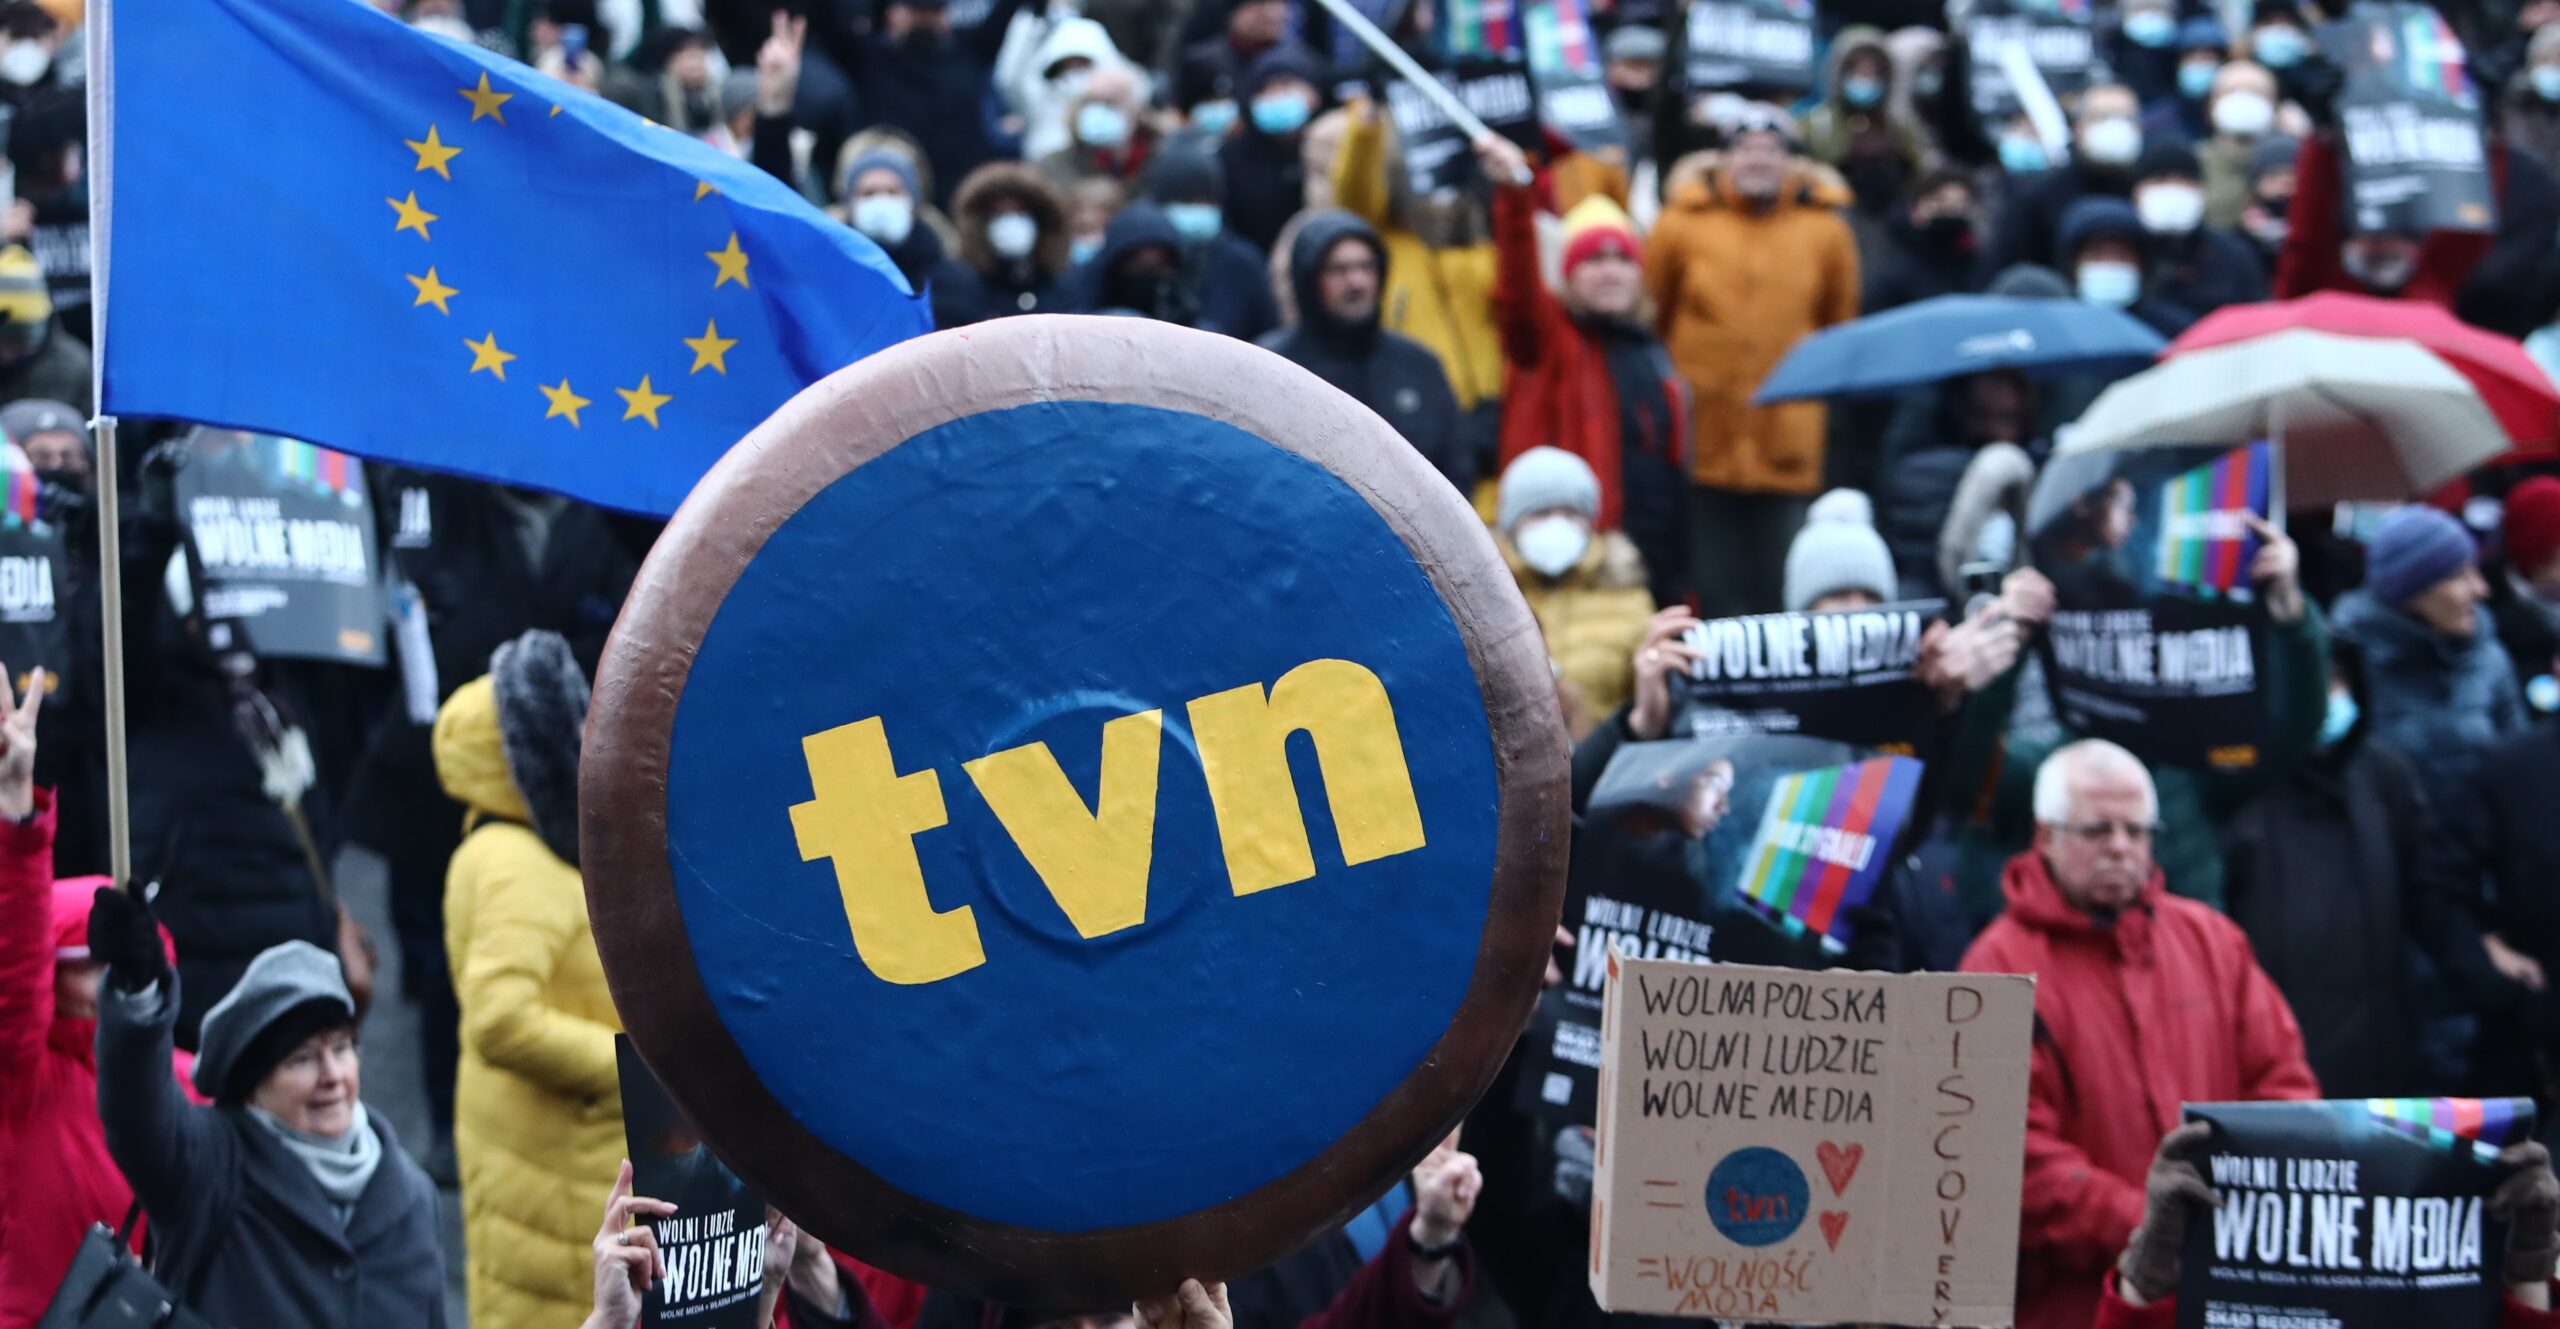 Thousands protest media ownership law targeting Poland's biggest TV network | Notes From Poland